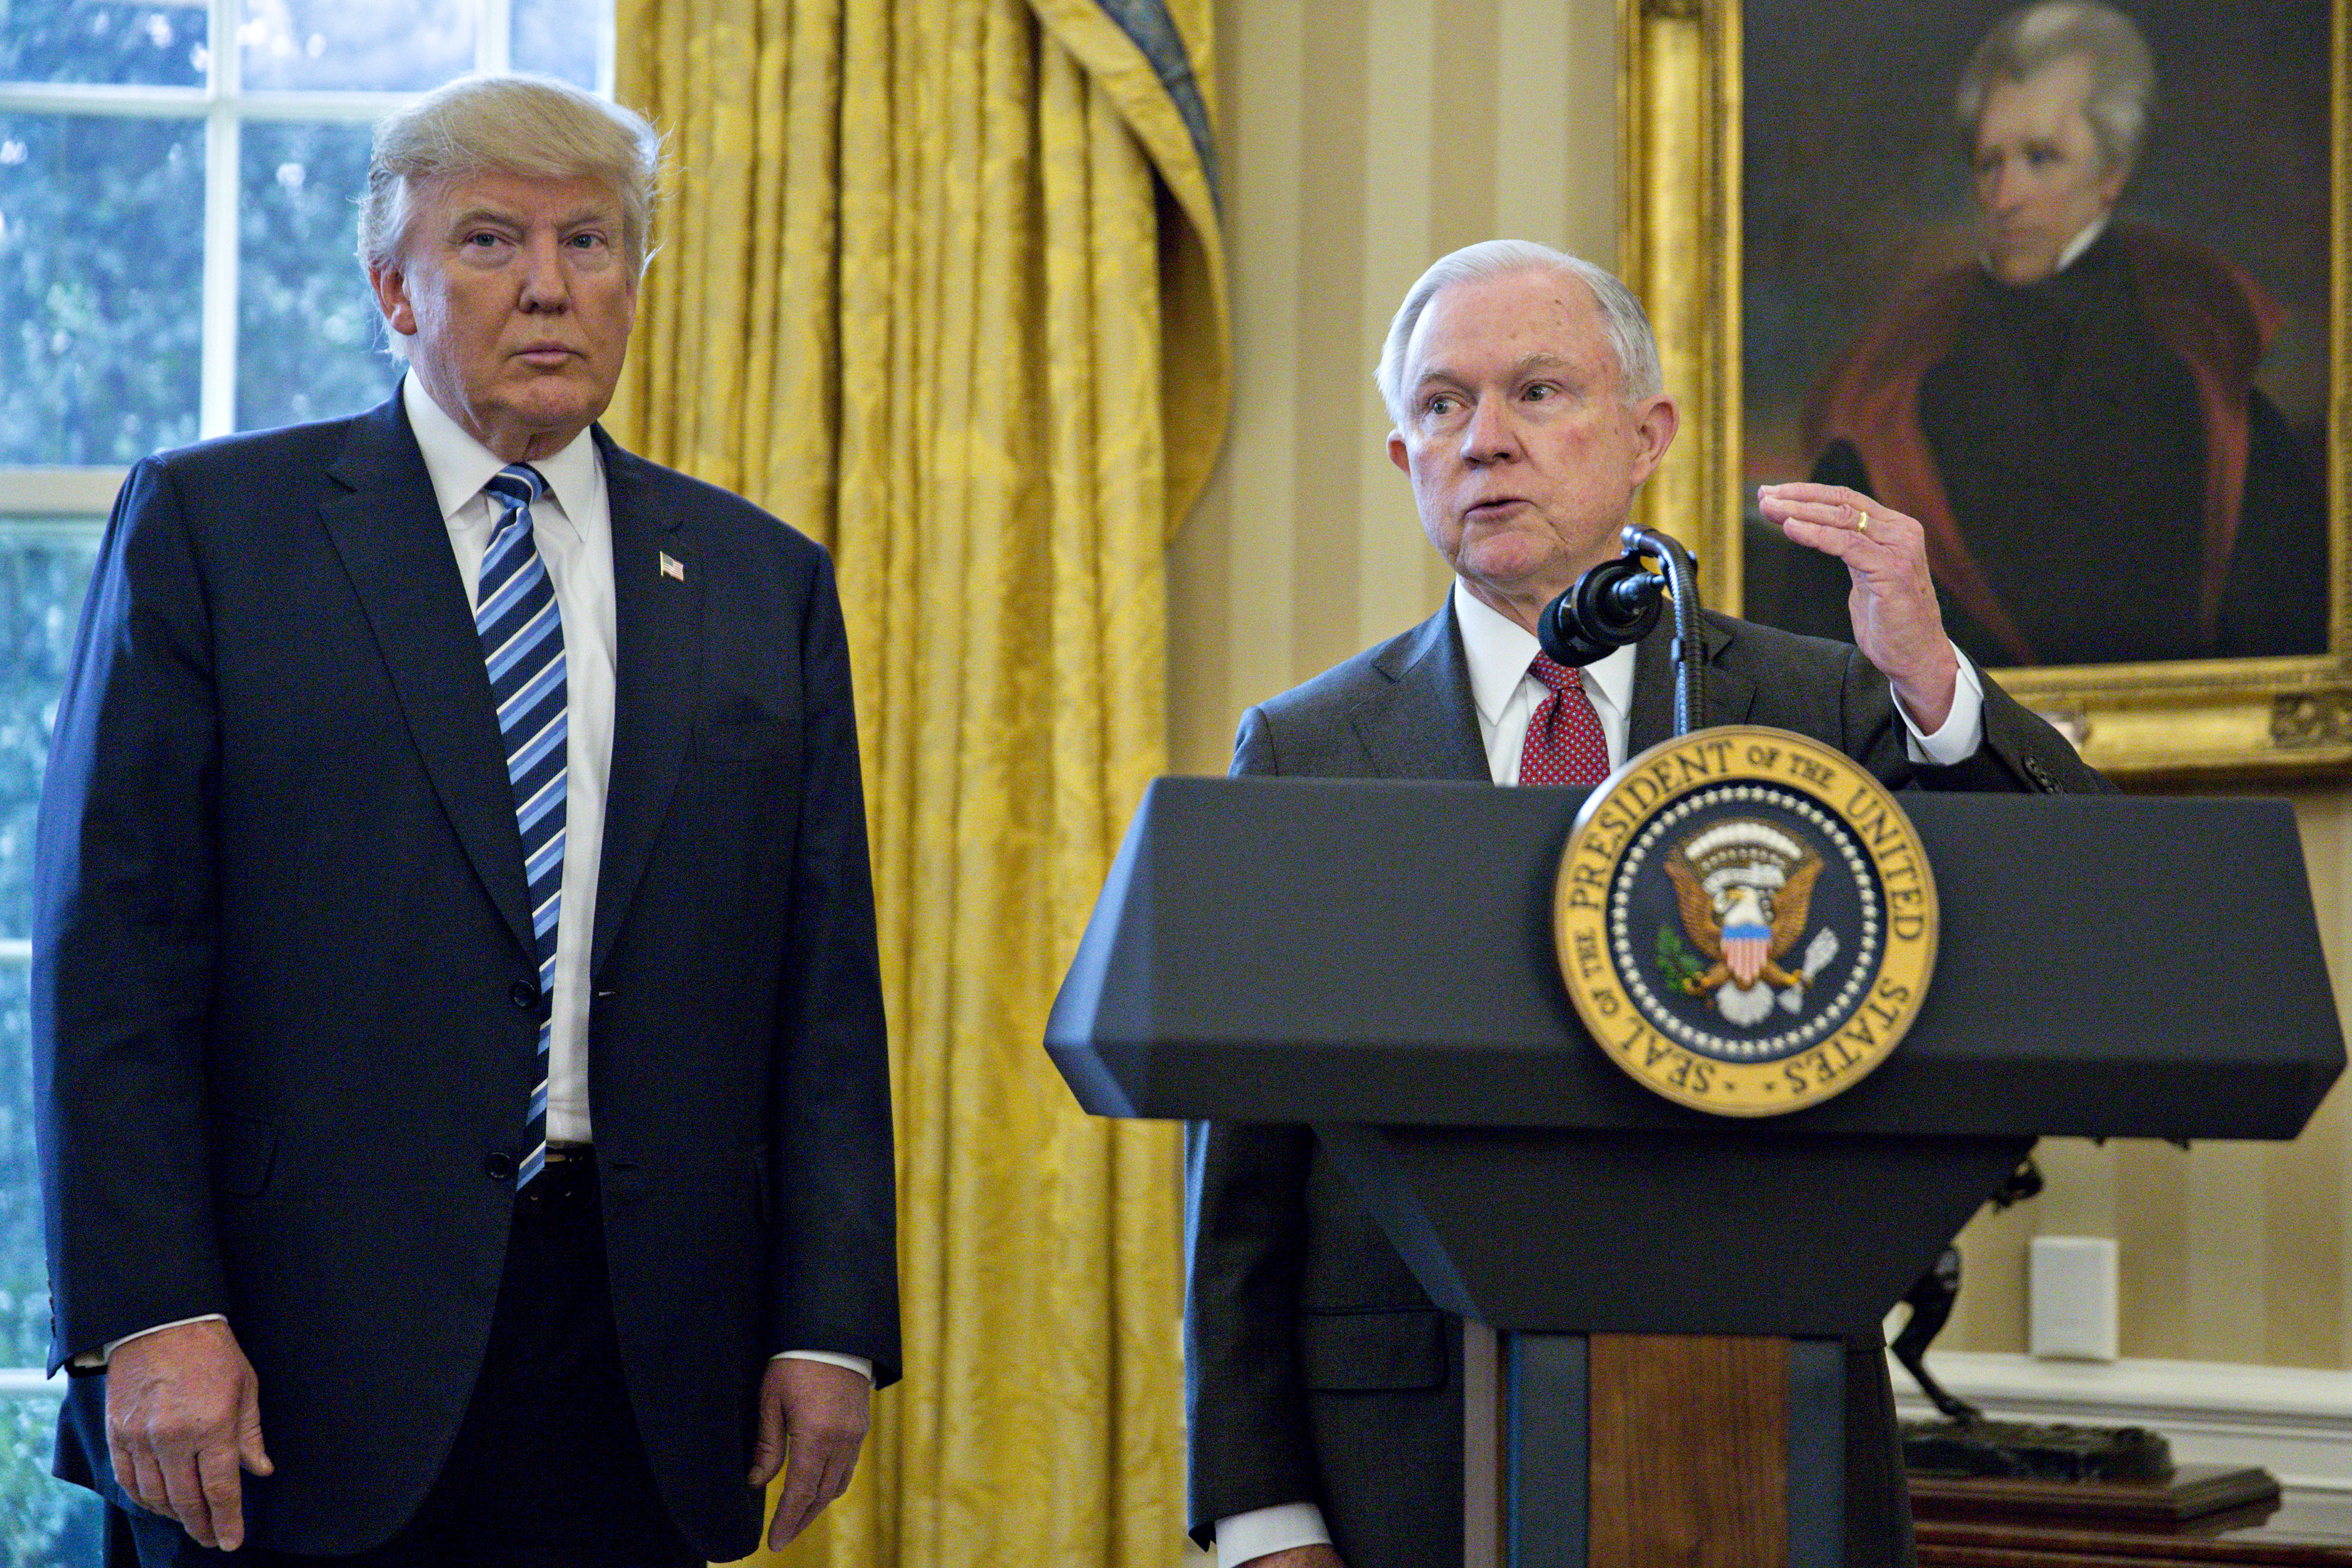 Jeff Sessions, U.S. attorney general, speaks as U.S. President Donald Trump, left, listens after Sessions was sworn in by U.S. Vice President Mike Pence, not pictured, in the Oval Office of the White House in Washington, D.C., U.S., on Thursday, Feb. 9, 2017. (Andrew Harrer—Bloomberg via Getty Images)